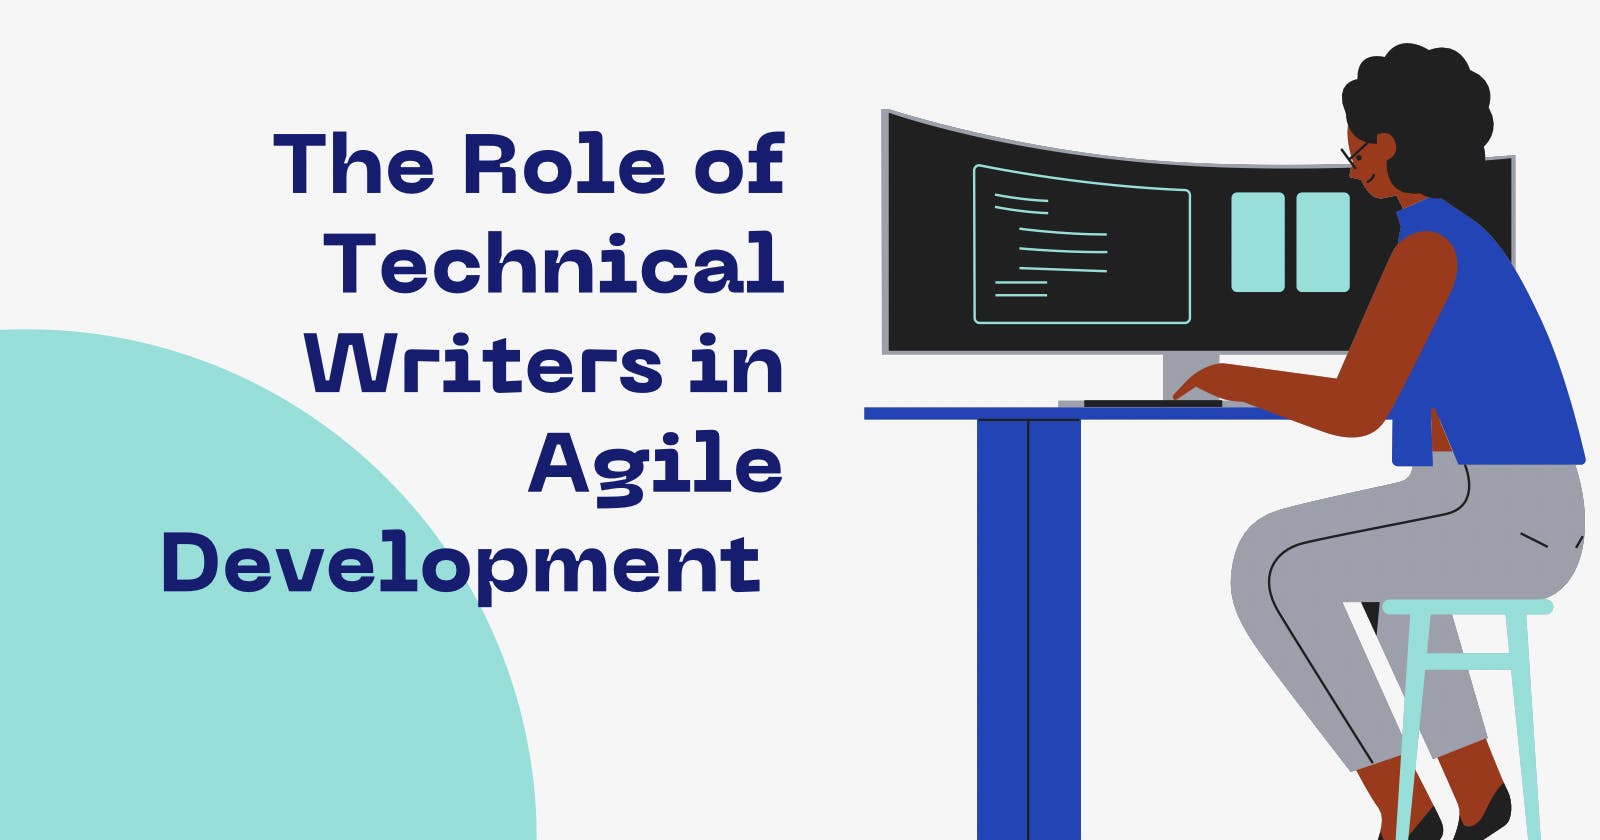 The Role of Technical Writers in Agile Development